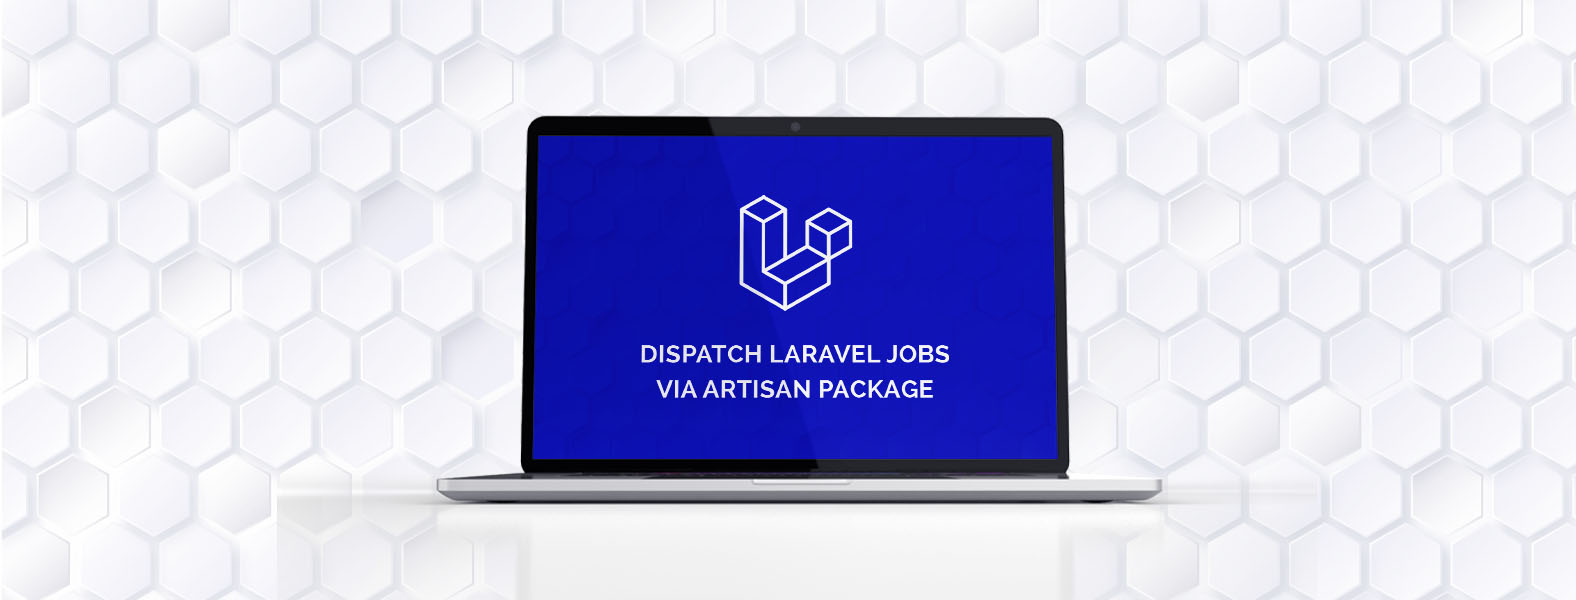 How to Dispatch Laravel Jobs Via Artisan Packages? cover image